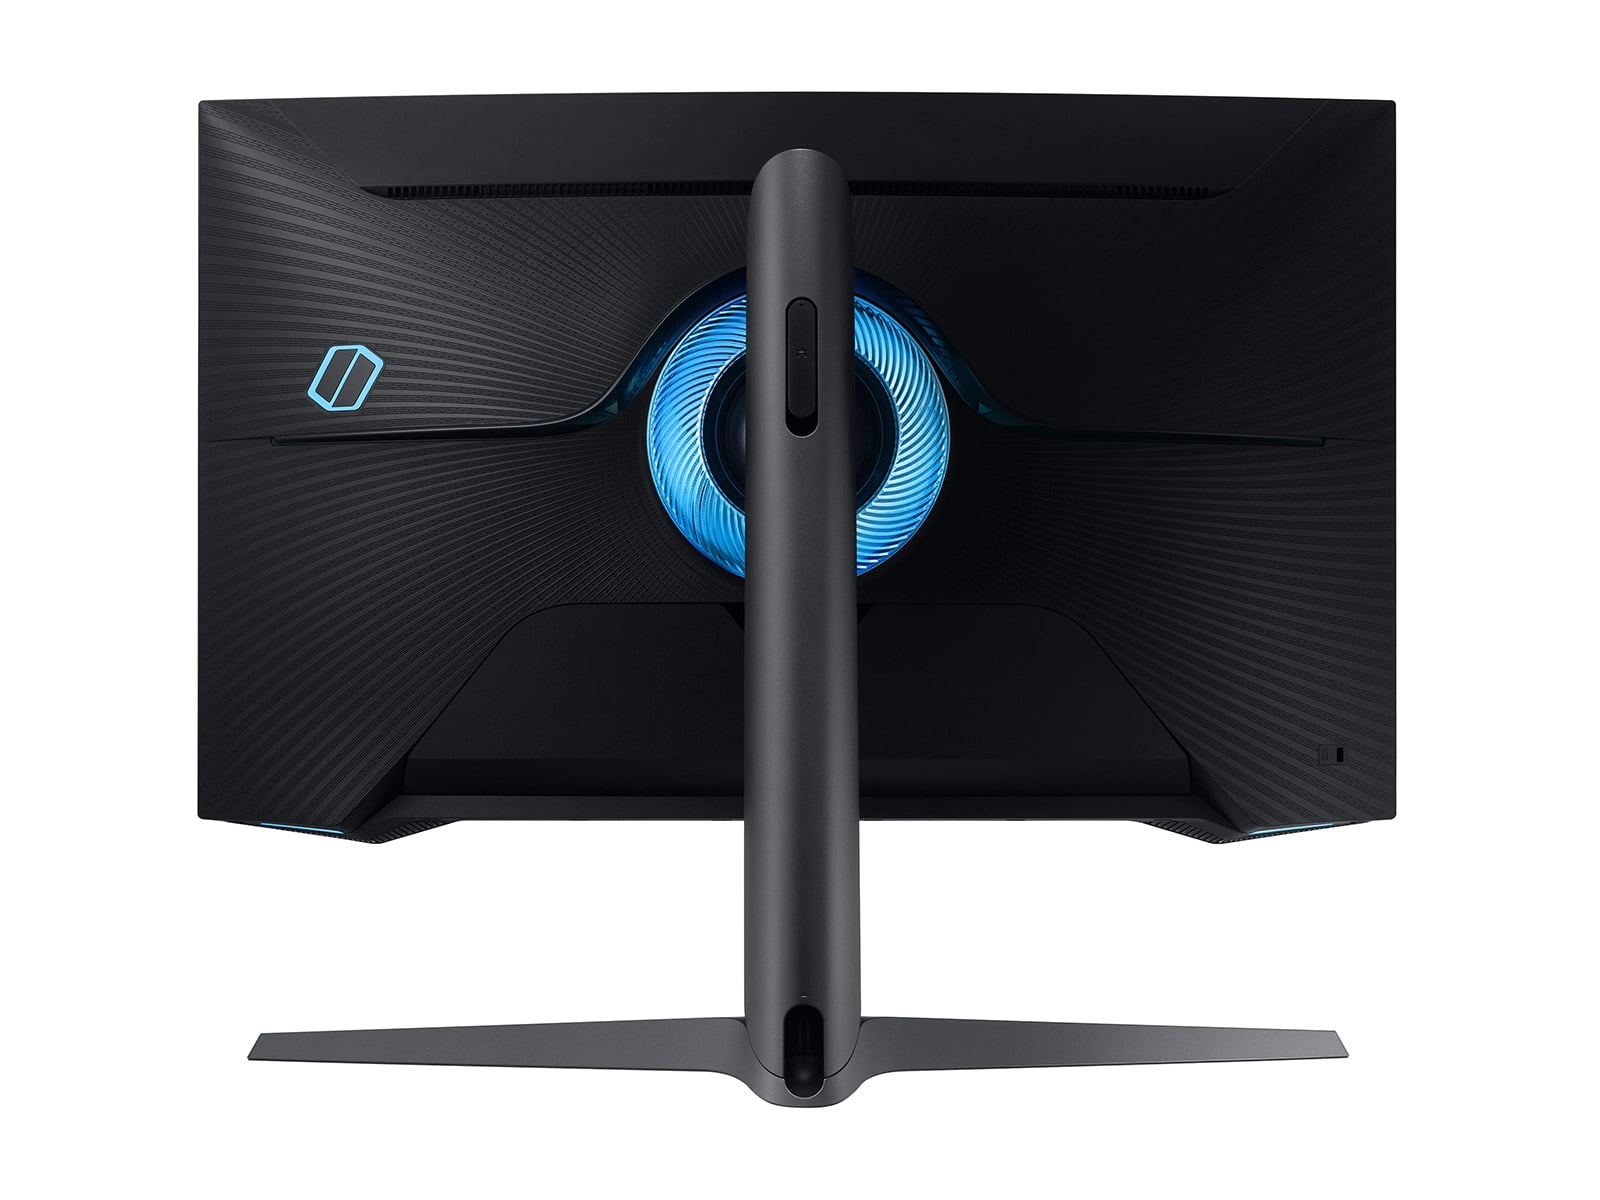 Samsung Odyssey G7 Gaming Curved Monitor LC27G75TQSNXZA